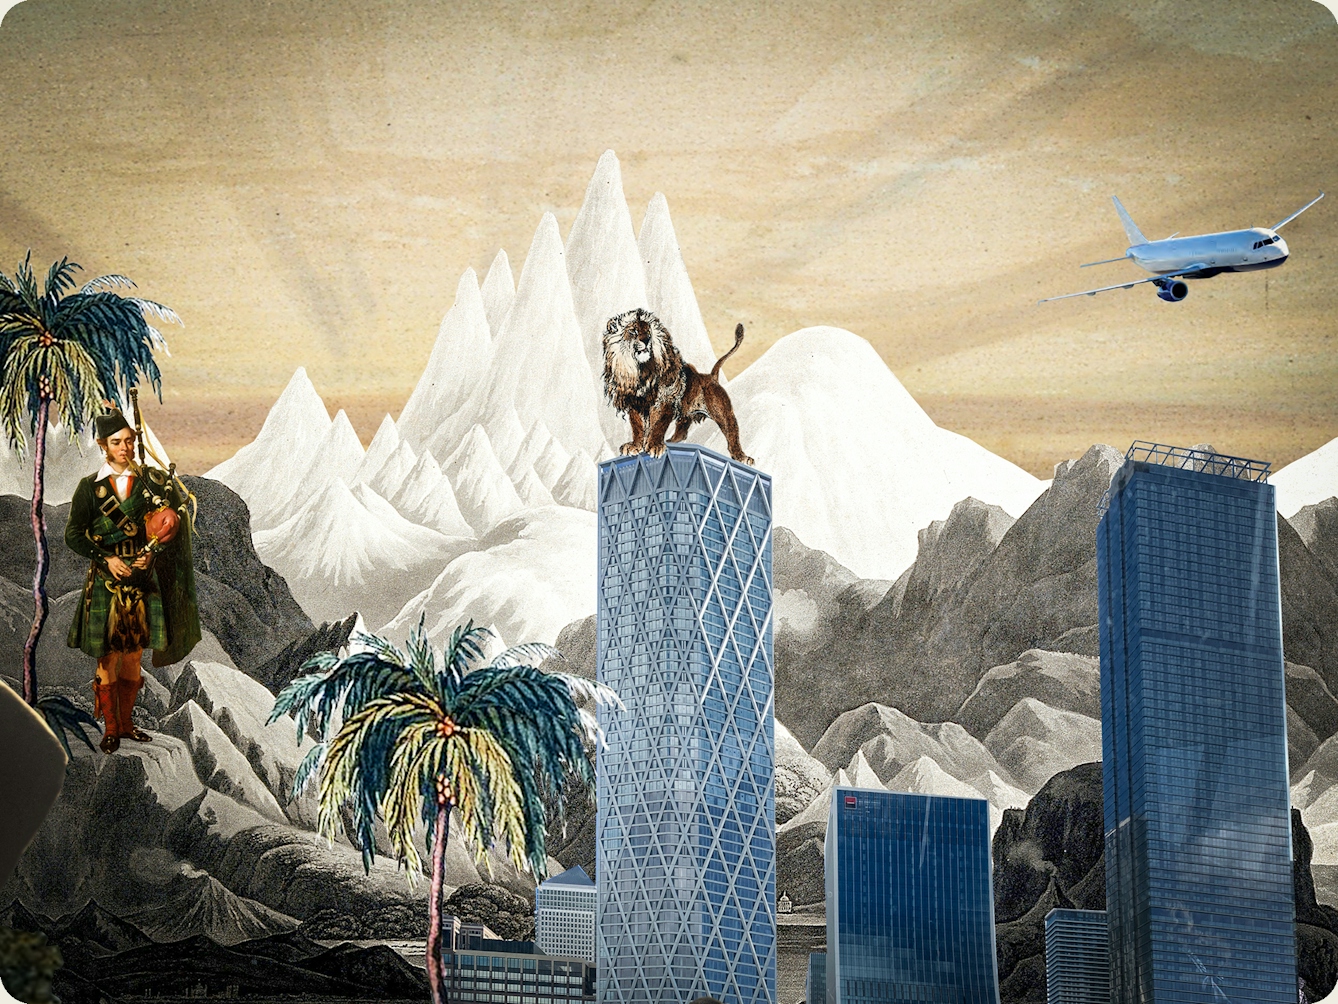 Artwork using collage.  The collaged elements are made up archive material which includes vintage photographs, etchings, painted illustrations, lithographic prints and line drawings. This artwork depicts a scene with an urban and rural combined background, where high snow covered mountain peaks rise in the distance. In the middle distance a Scottish piper stands on the hillside playing bagpipes, a lion stands on top of a cluster of large glass and metal skyscrapers. In the sky above is an aeroplane.